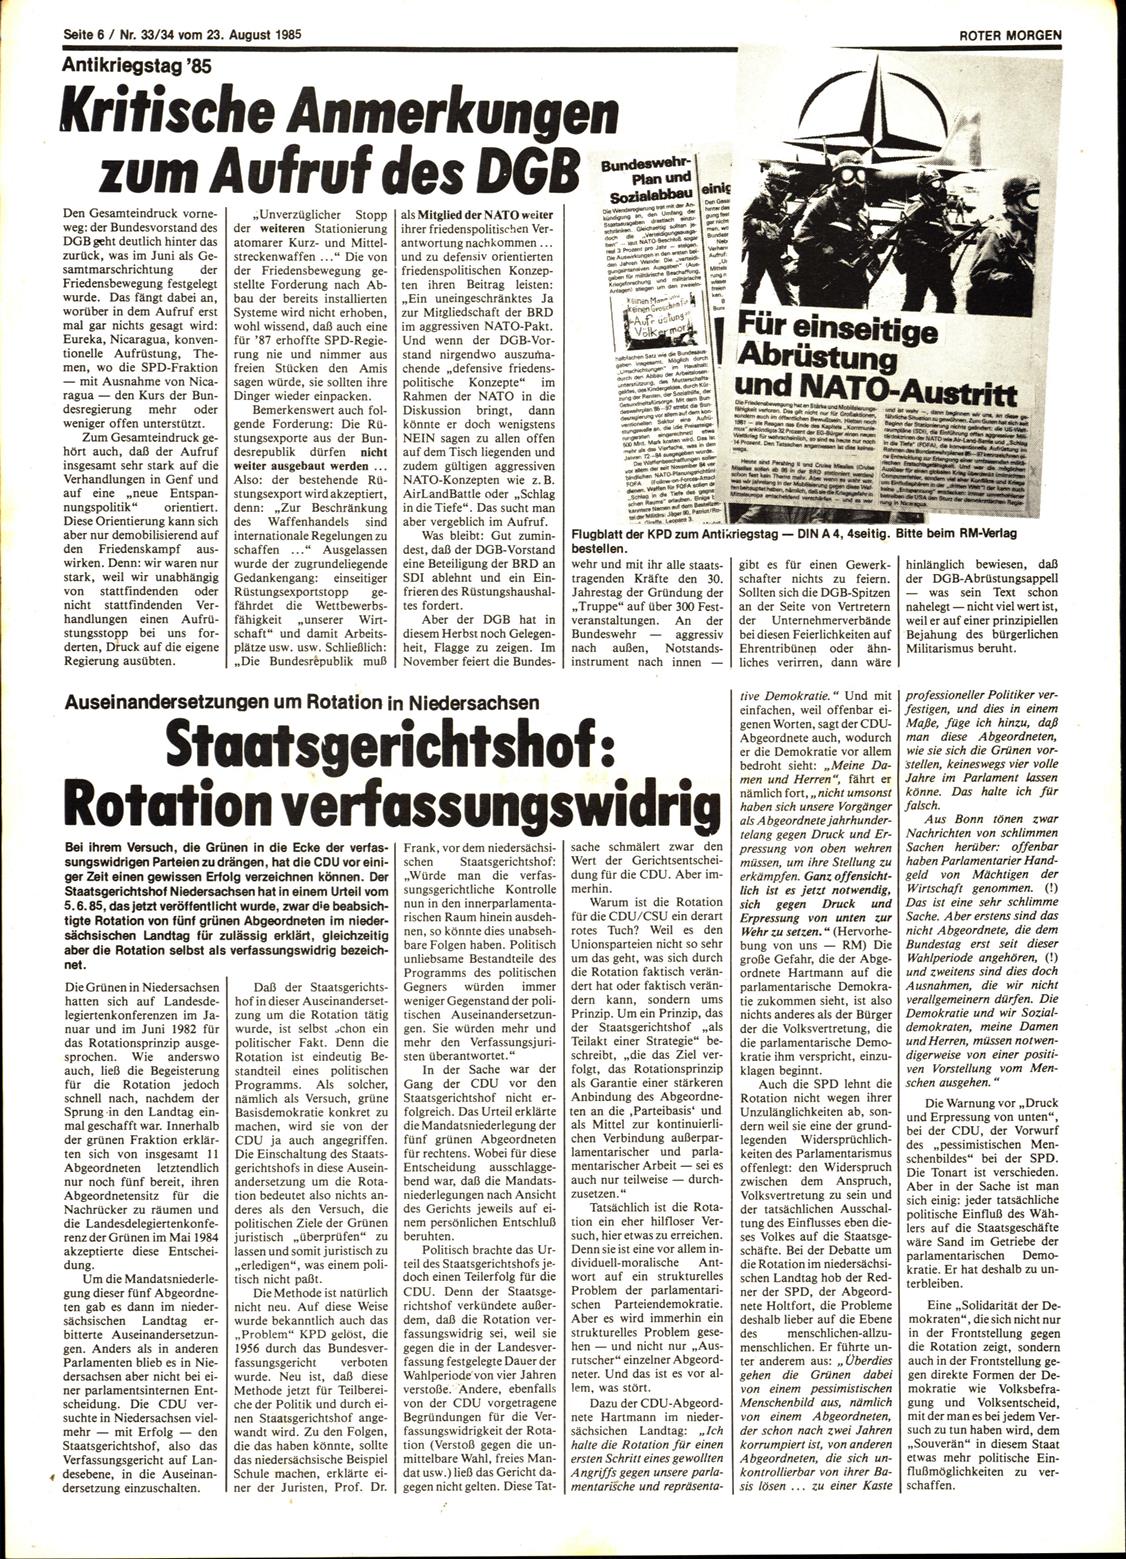 Roter Morgen, 19. Jg., 23. August 1985, Nr. 33/34, Seite 6